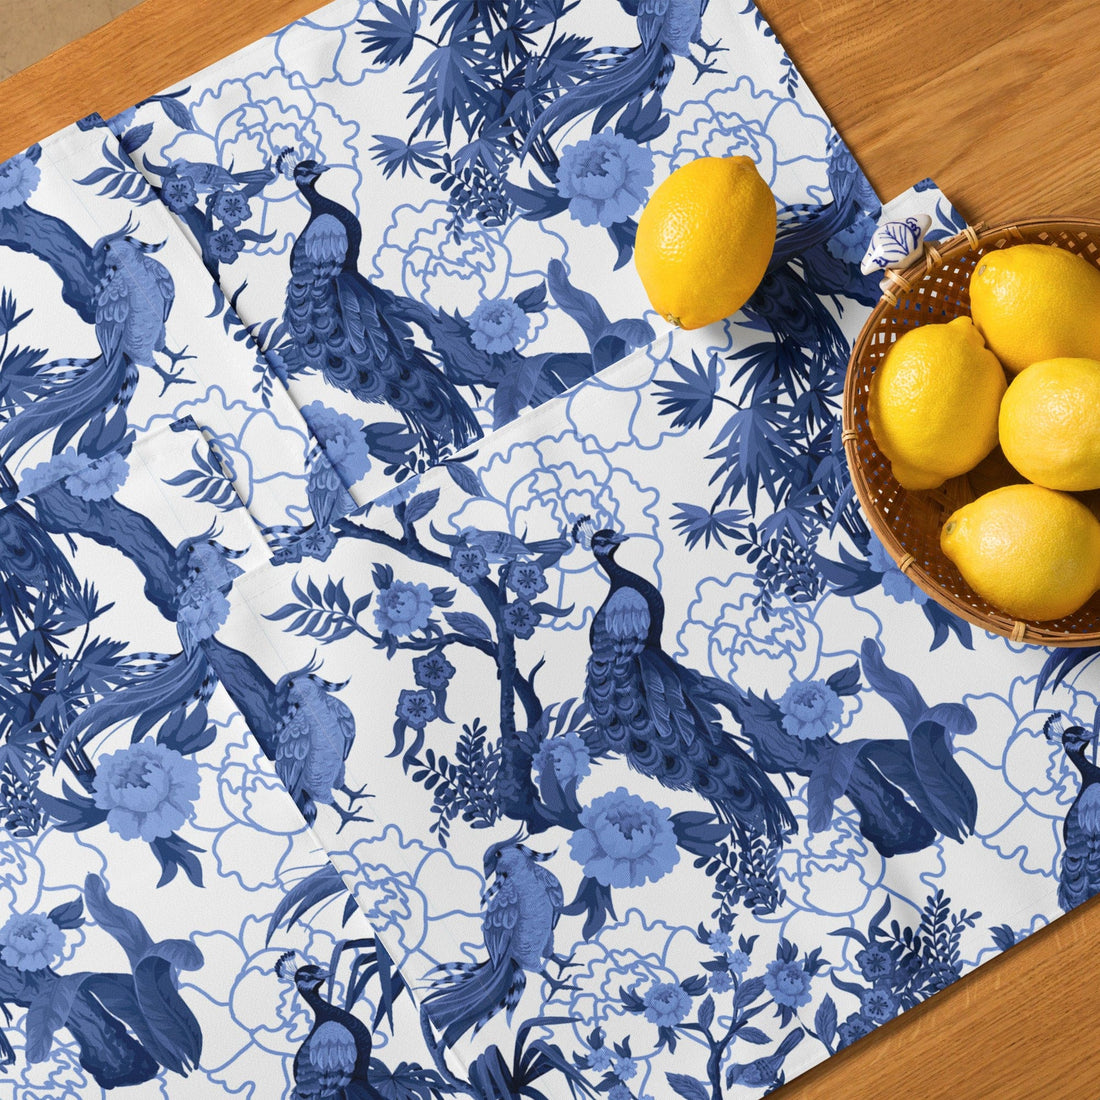 Kate McEnroe New York Set of 4 Chinoiserie Peacock Placemats, Blue and White Floral Print, Elegant Table Linens, Oriental Bird Design, Chic Dining DecorPlacemats6439711_17484